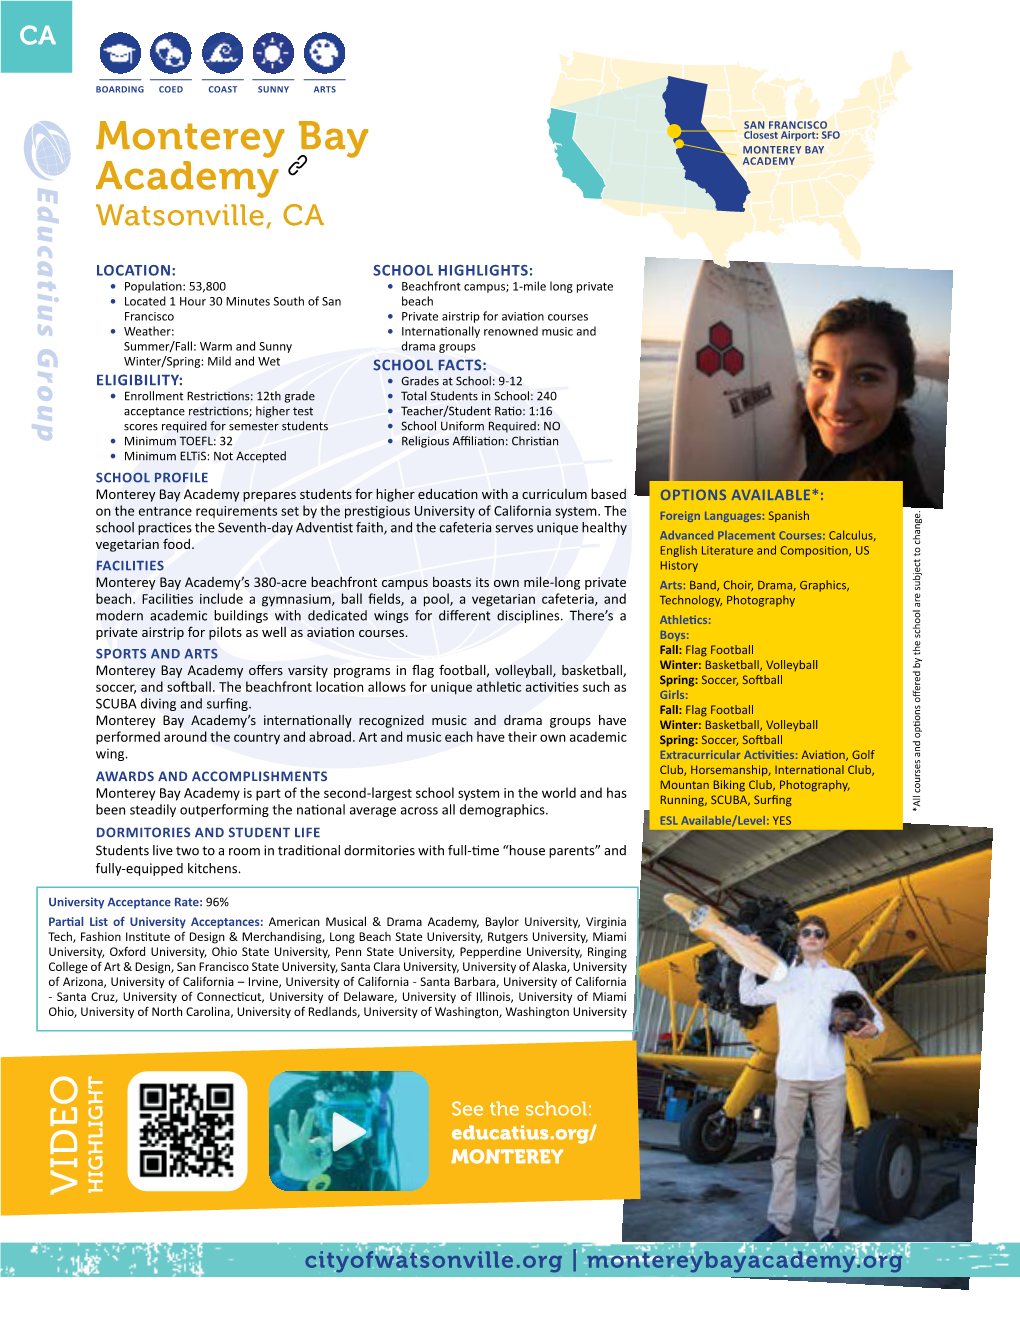 Monterey Bay Academy Is Part of the Second-Largest School System in the World and Has Wing